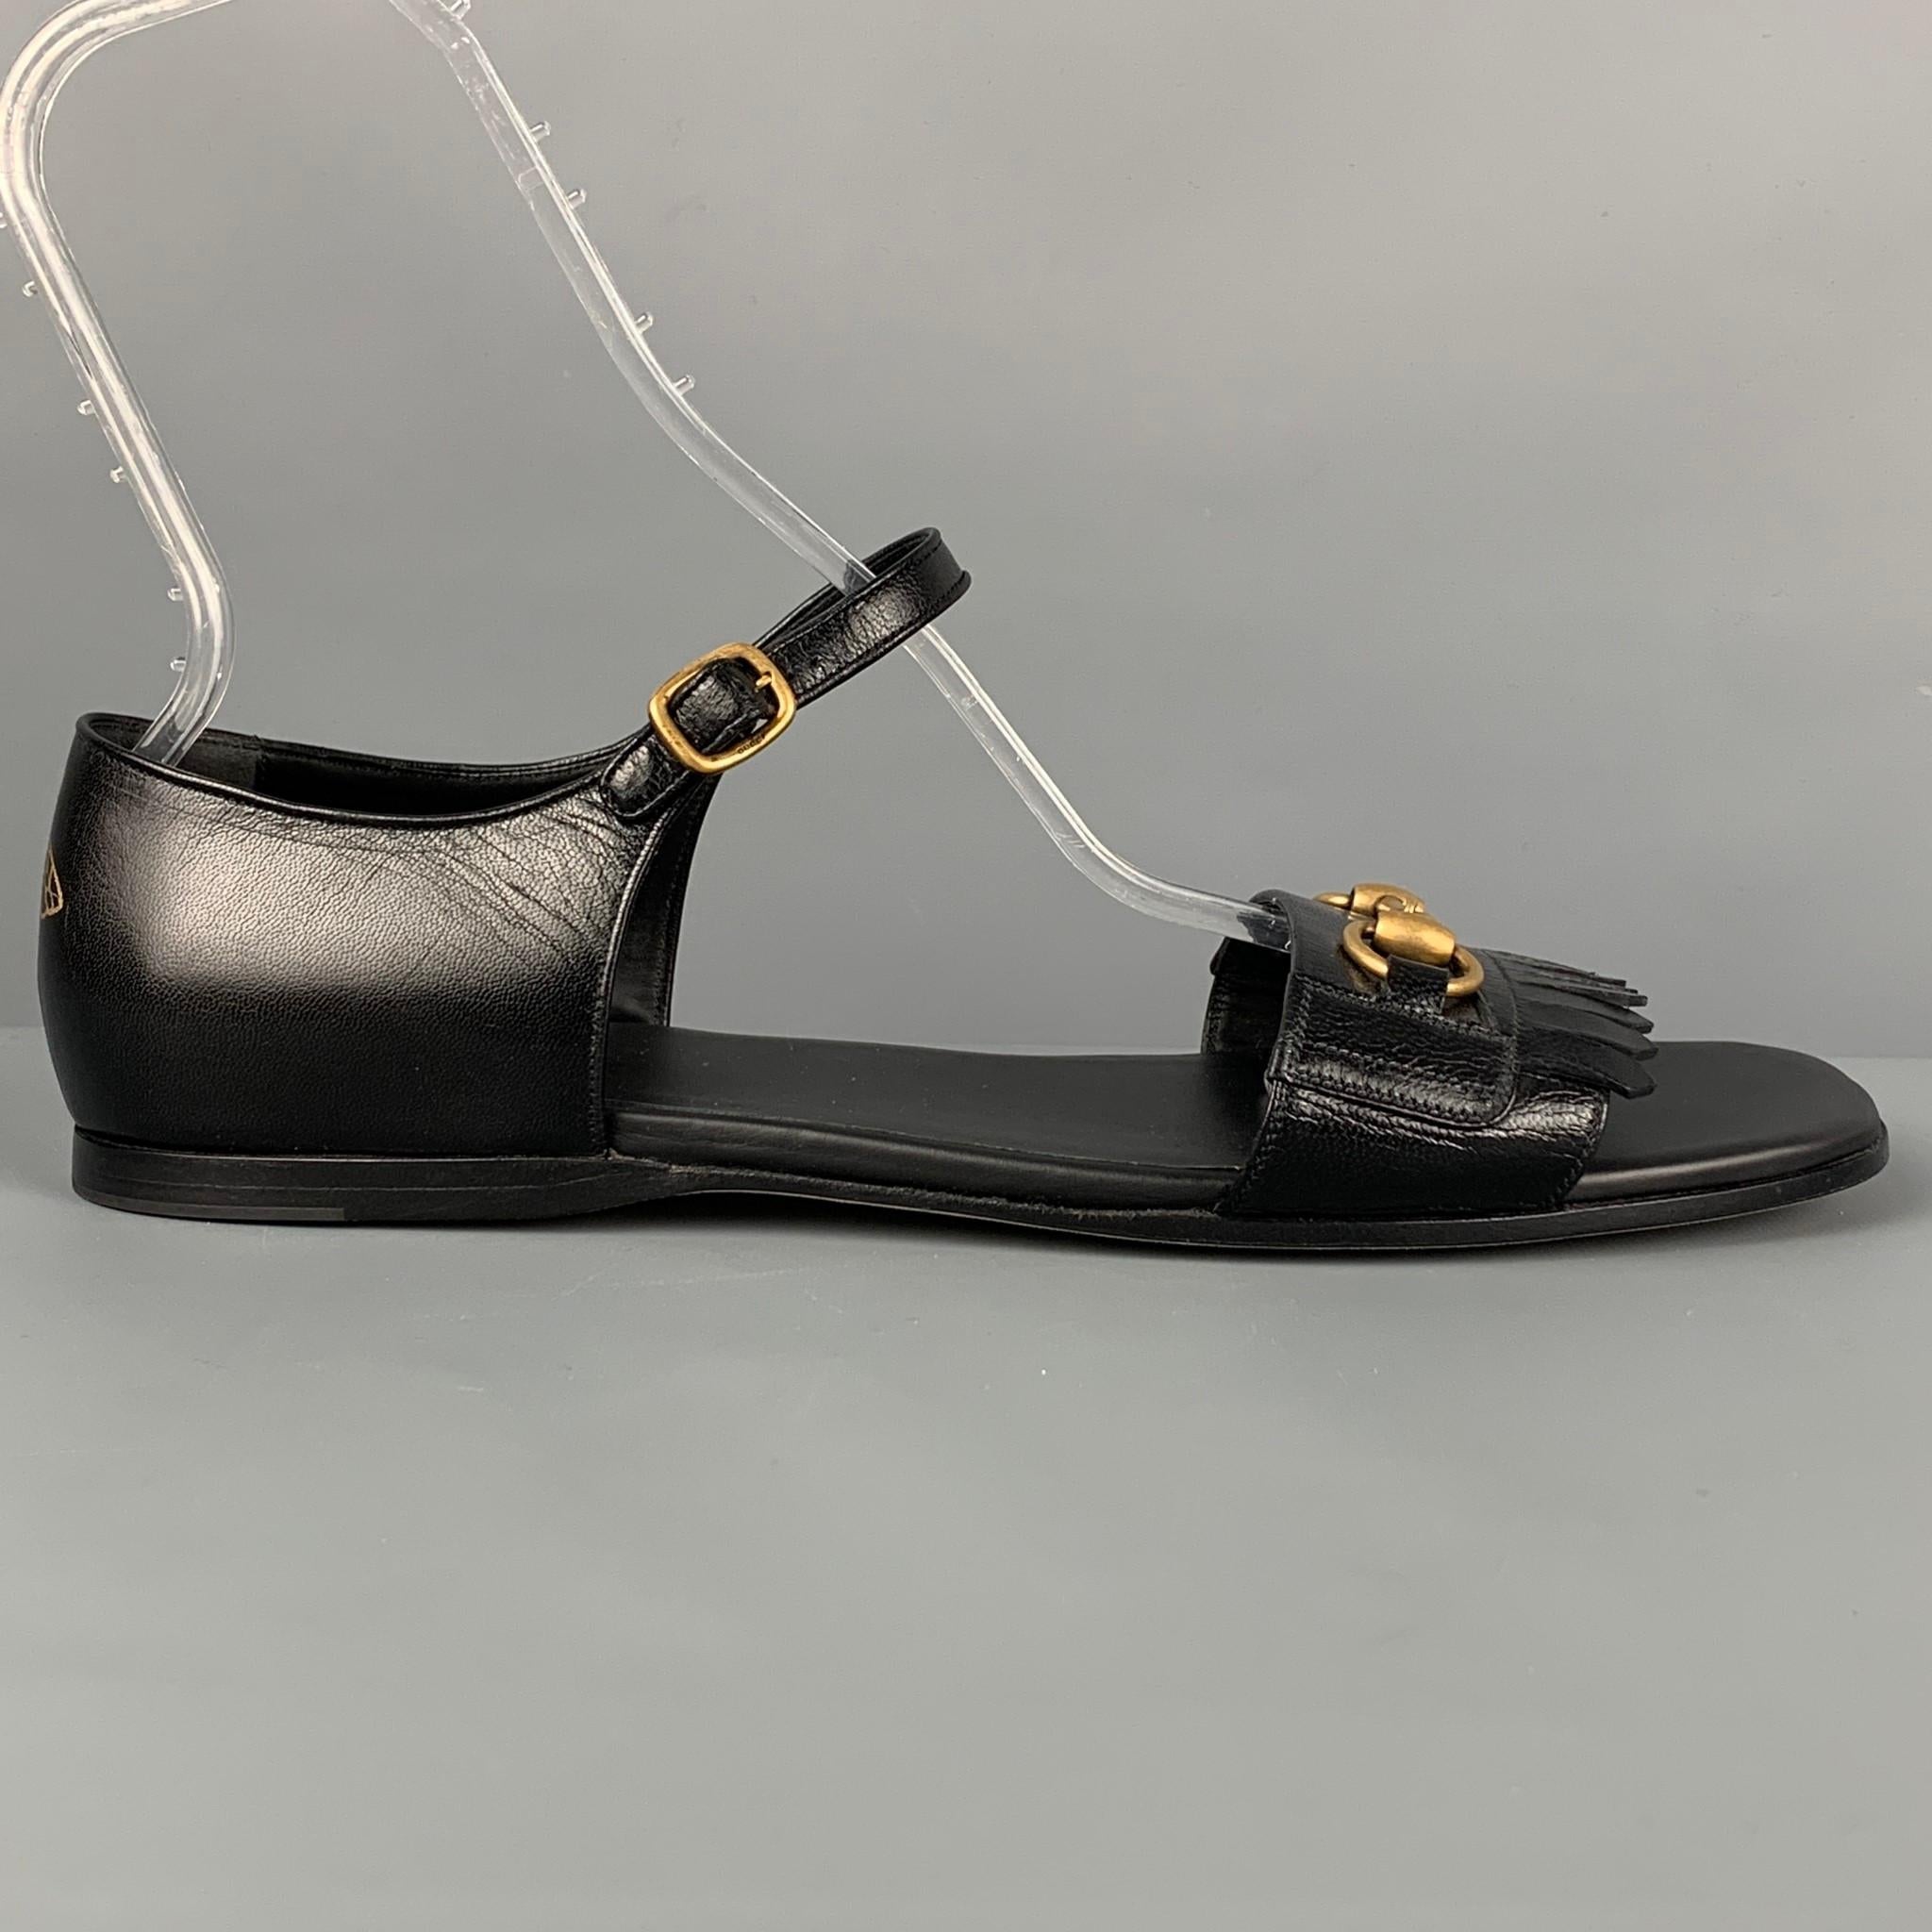 GUCCI sandals comes in a black leather featuring a horsebit detail, fringe trim, back heel bee design, and a ankle strap closure. Made in Italy. 

Excellent Pre-Owned Condition.
Marked: 12

Outsole: 12.25 in. x 4.5 in. 